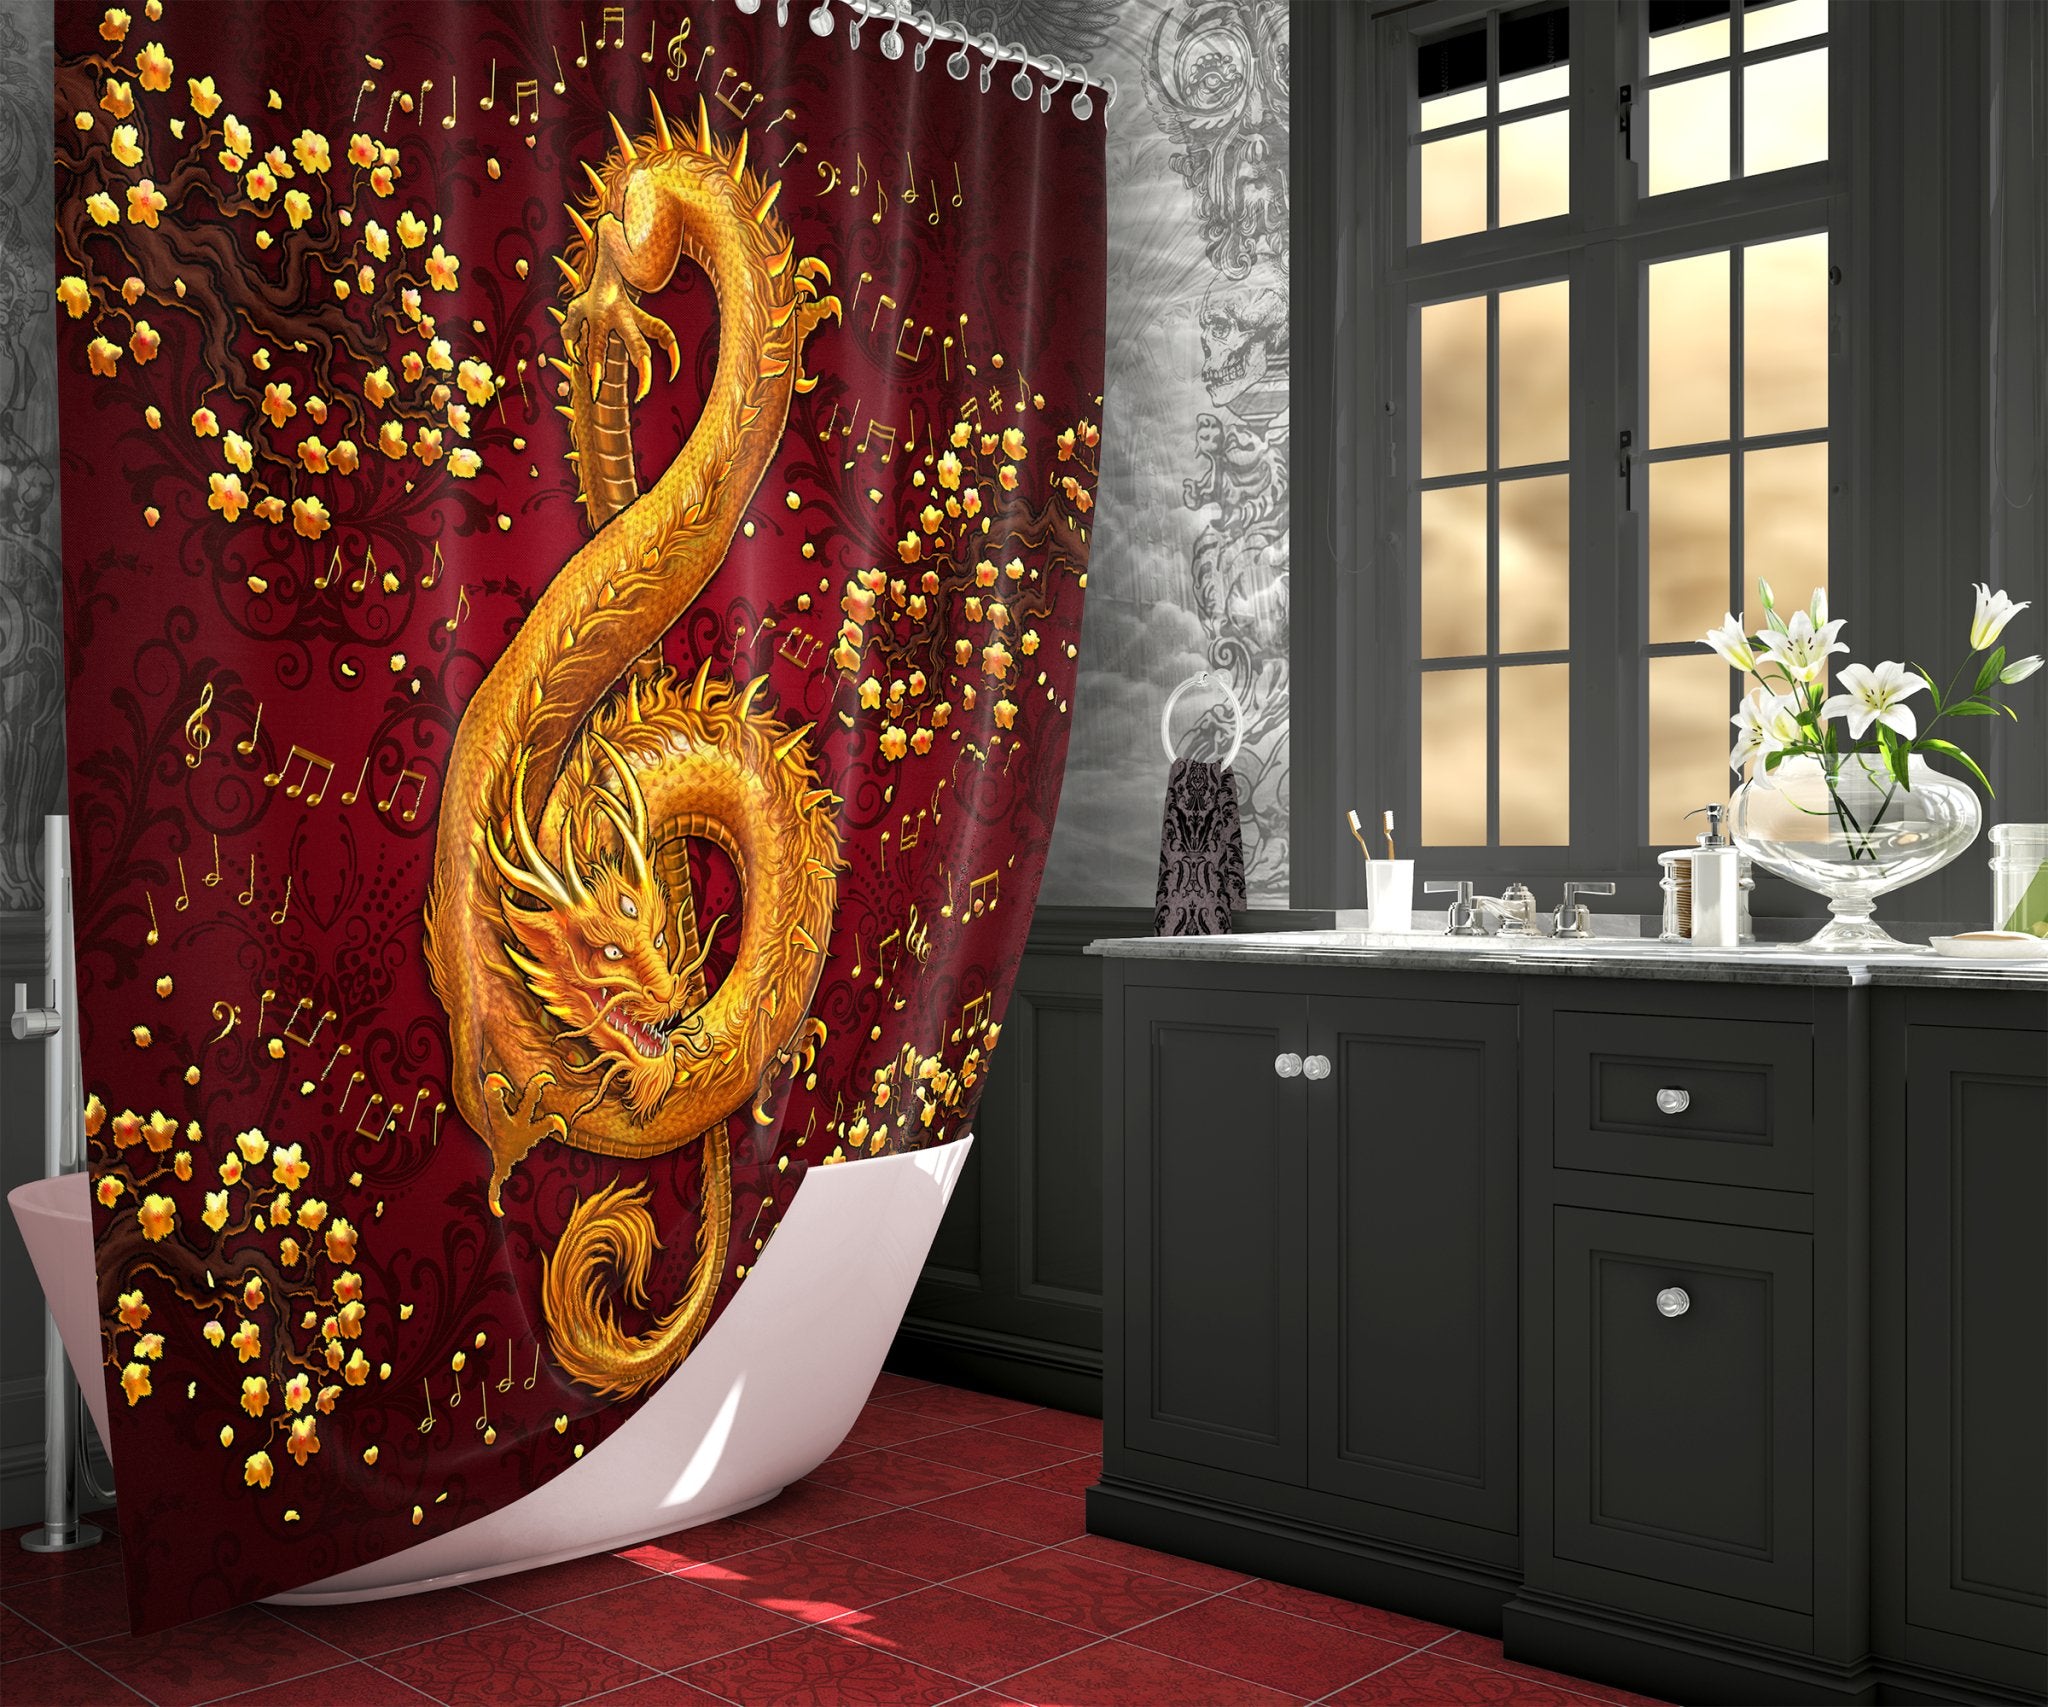 Gold Dragon Shower Curtain, 71x74 inches, Fantasy Art, Alternative Bathroom Decor, Treble Clef, Music Home Art - Black and Red, 2 Colors - Abysm Internal